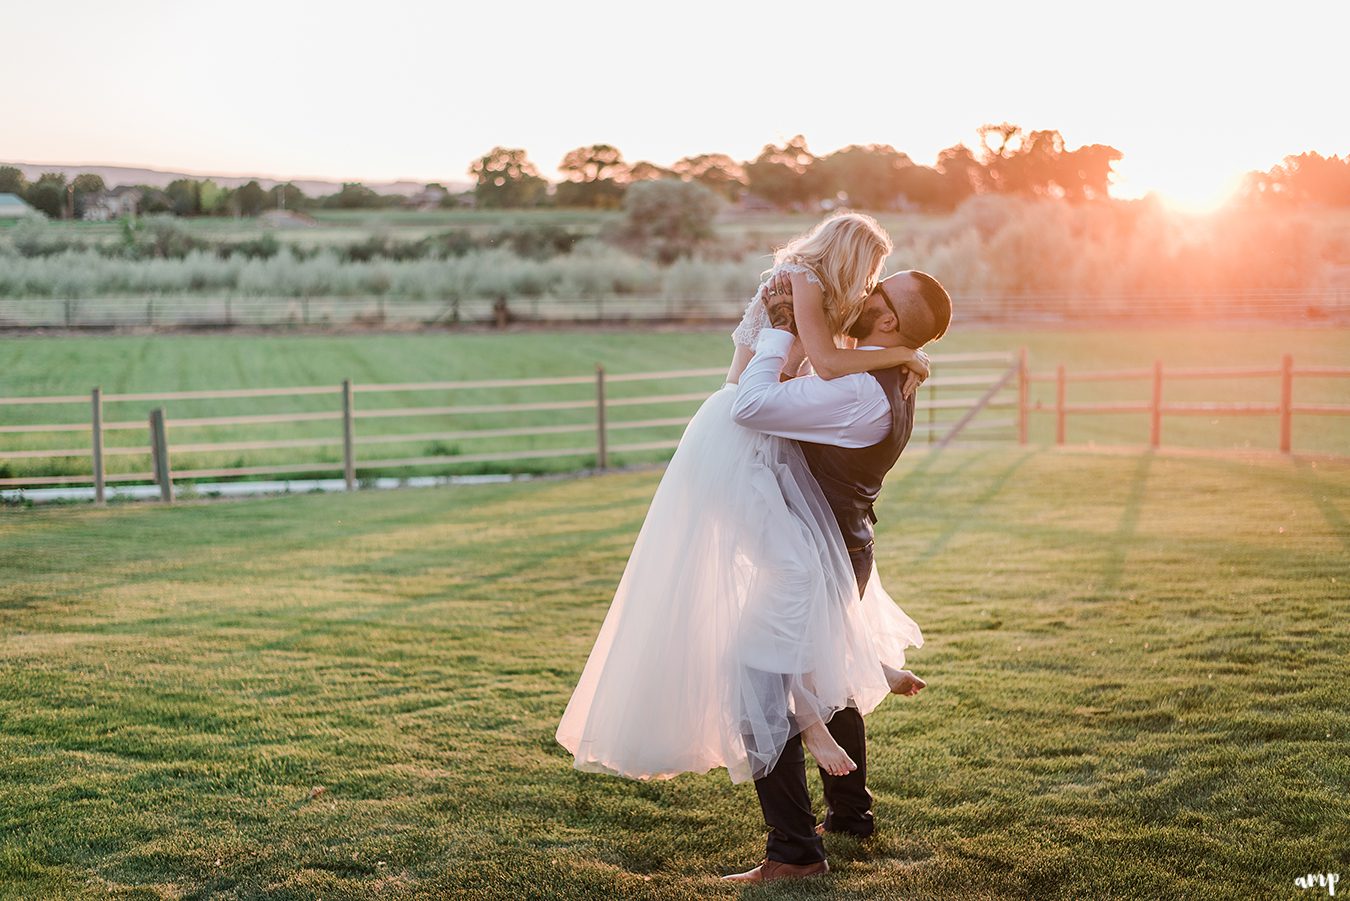 Beth leaping into Dustin's arms with sunset behind | Grand Junction Backyard Wedding | amanda.matilda.photography